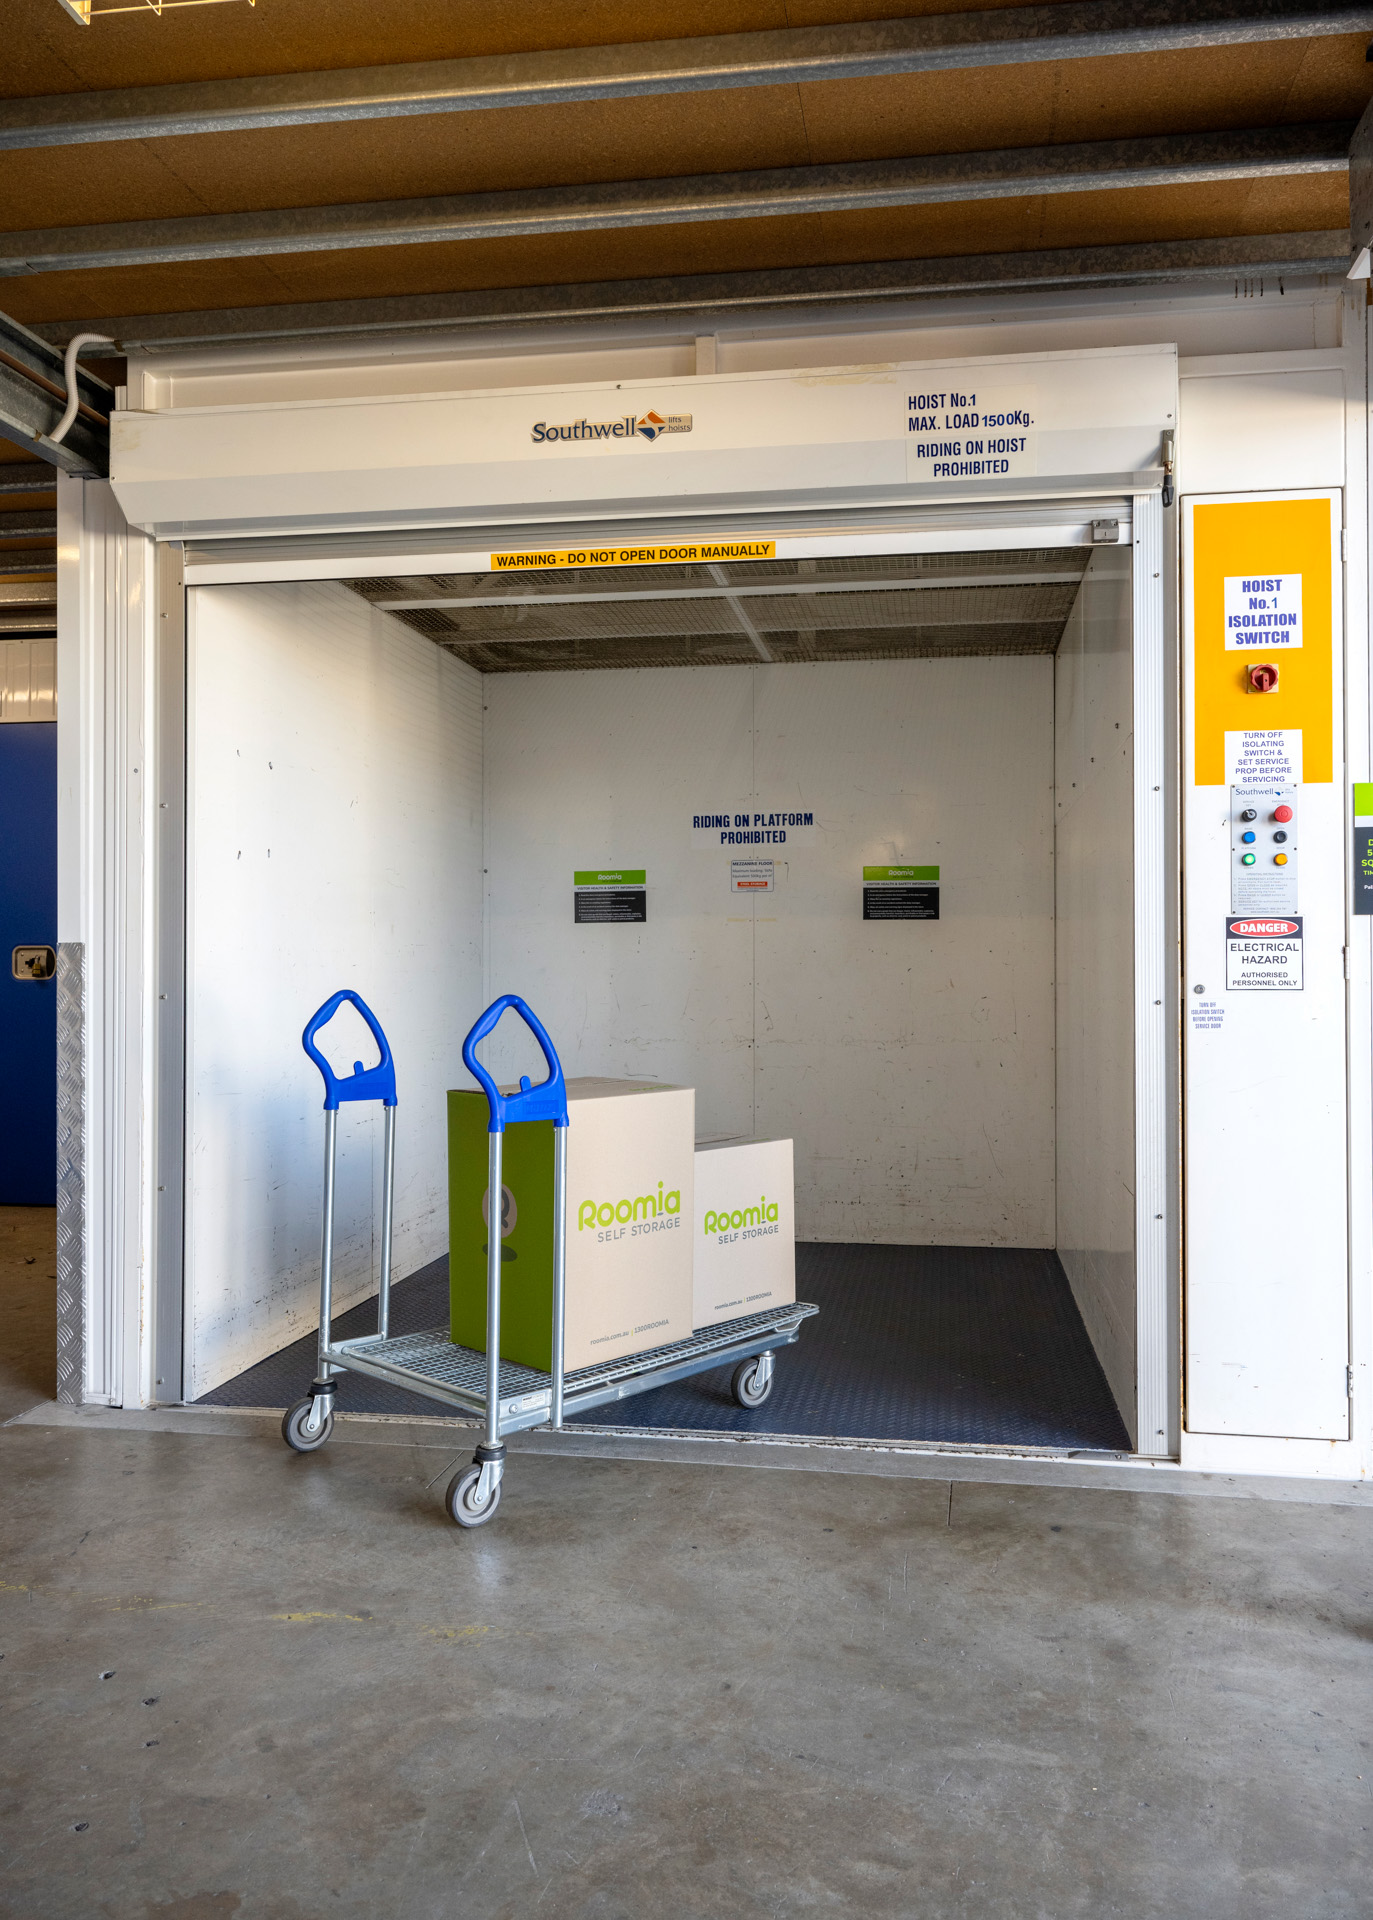 Spacious goods lift at our self storage facility, providing efficient and hassle-free vertical transportation for heavy or bulky items.